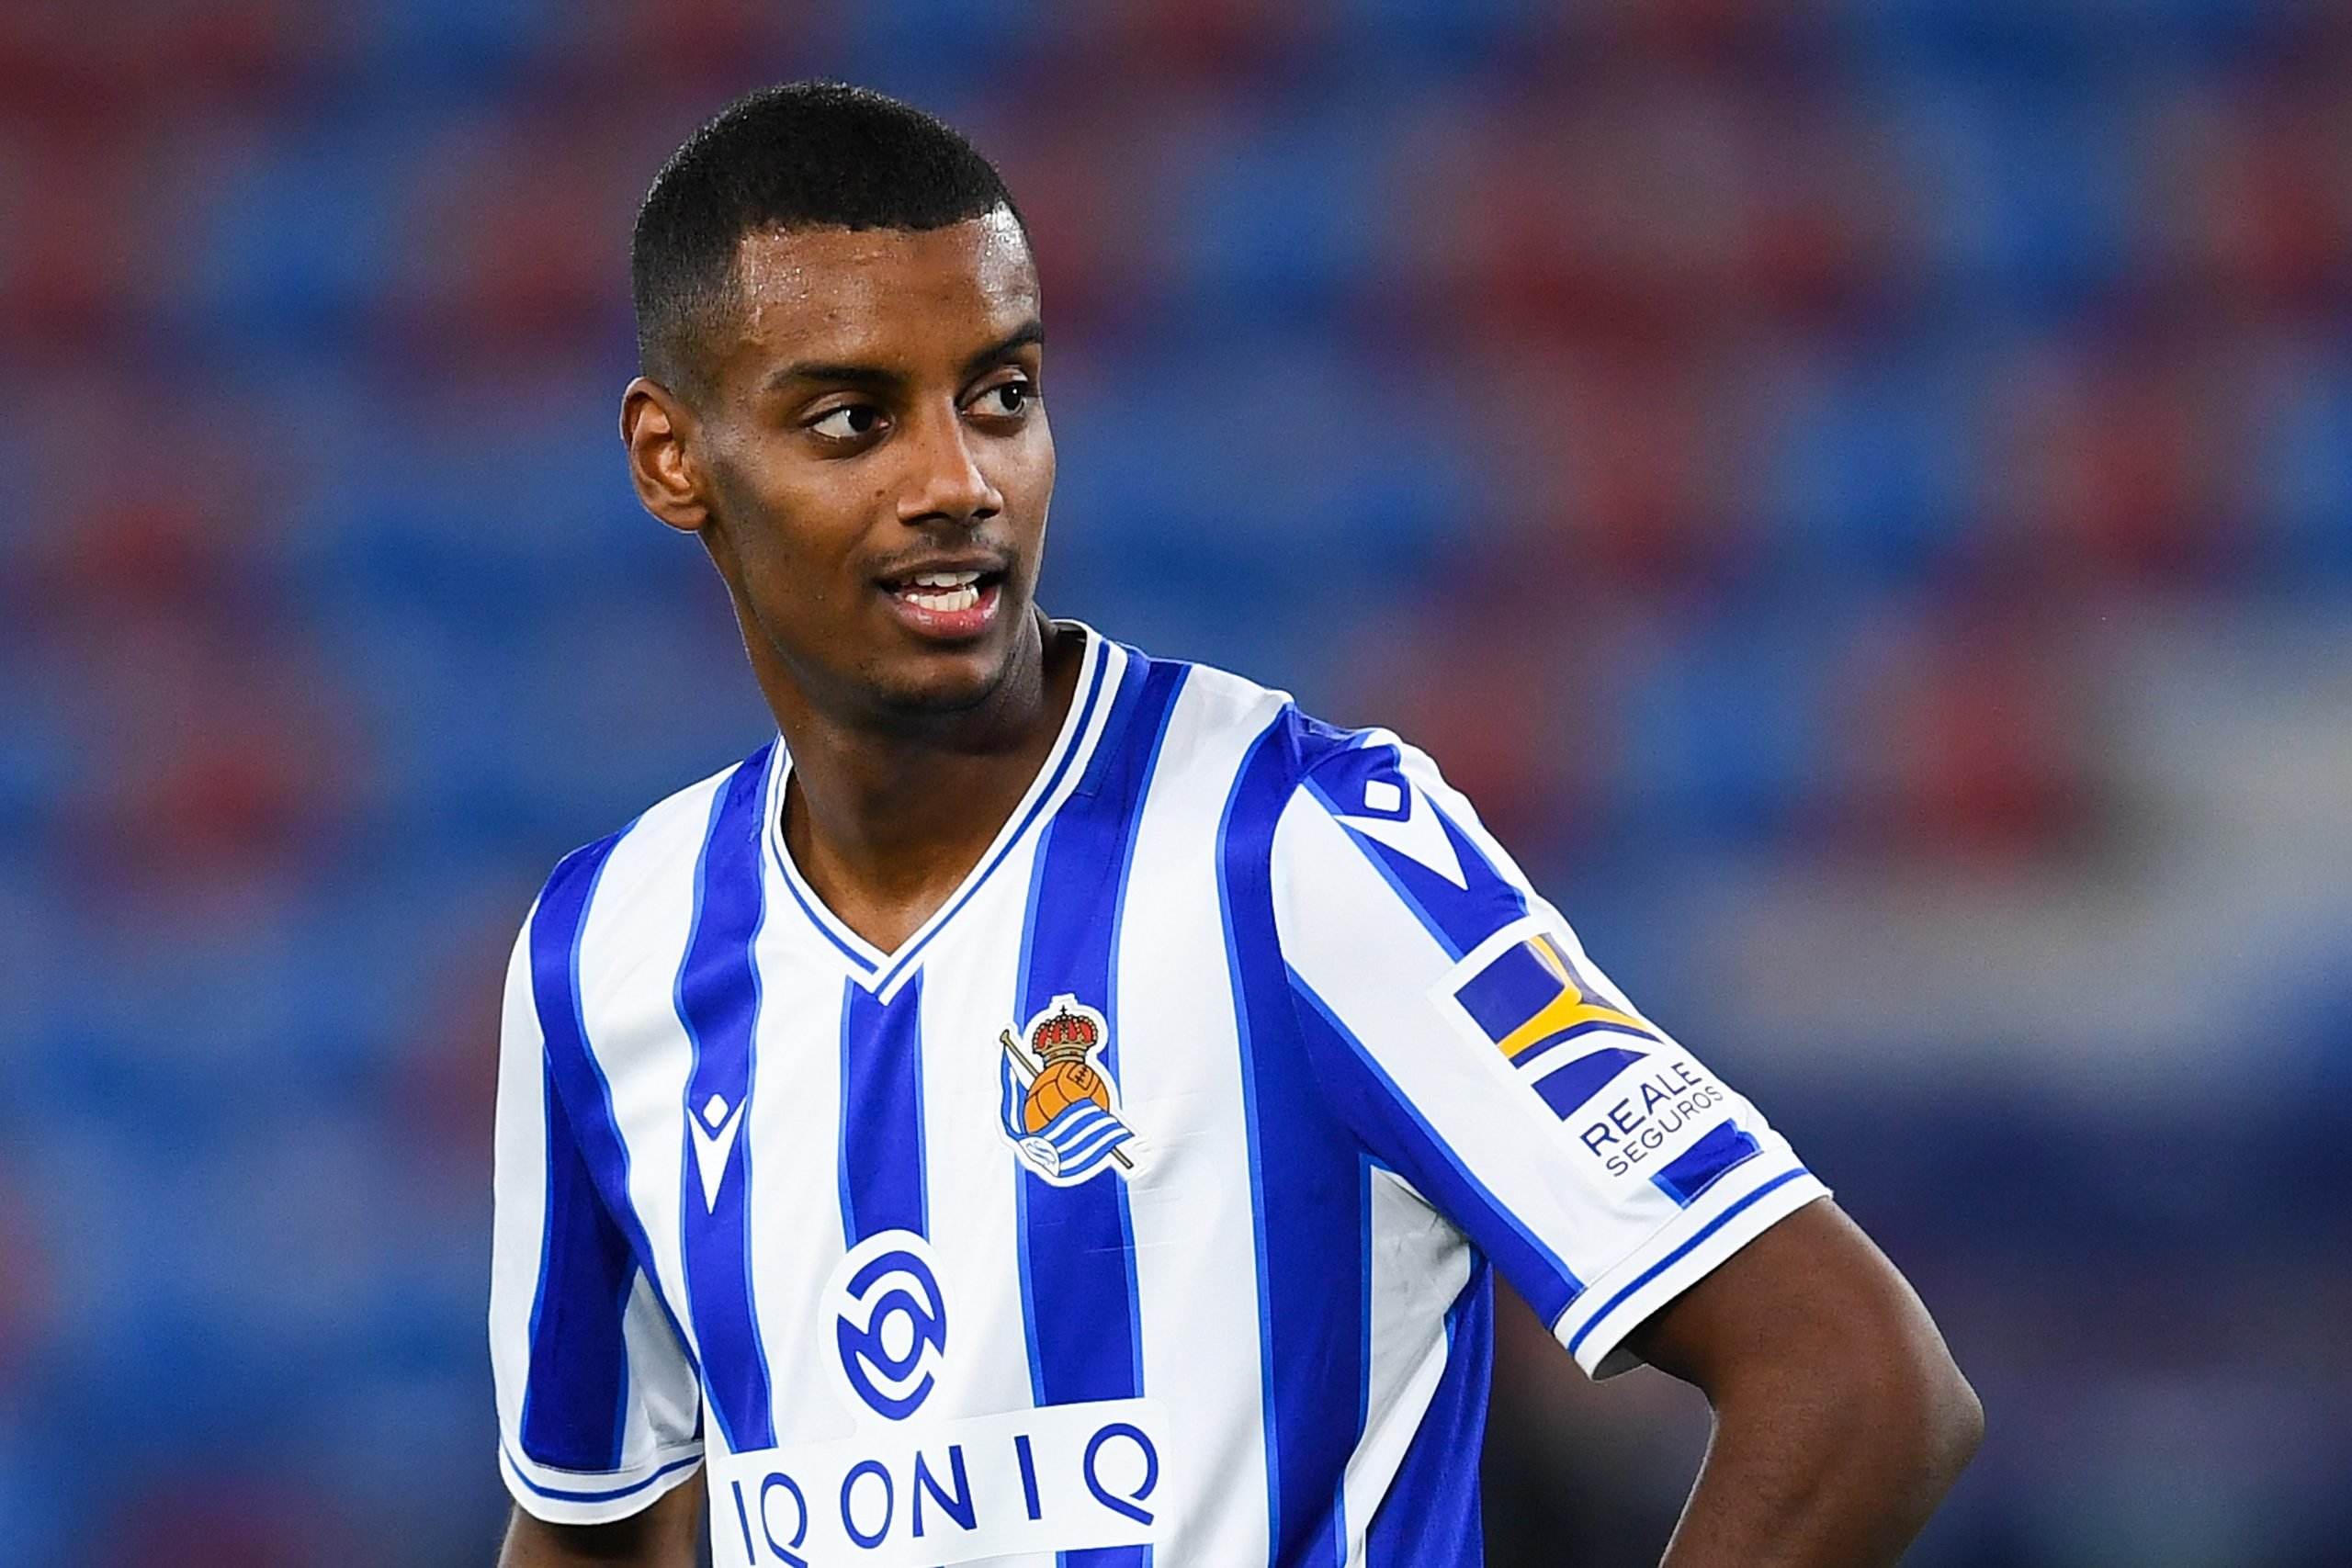 Newcastle United agree deal €75m with Real Sociedad for Alexander Isak